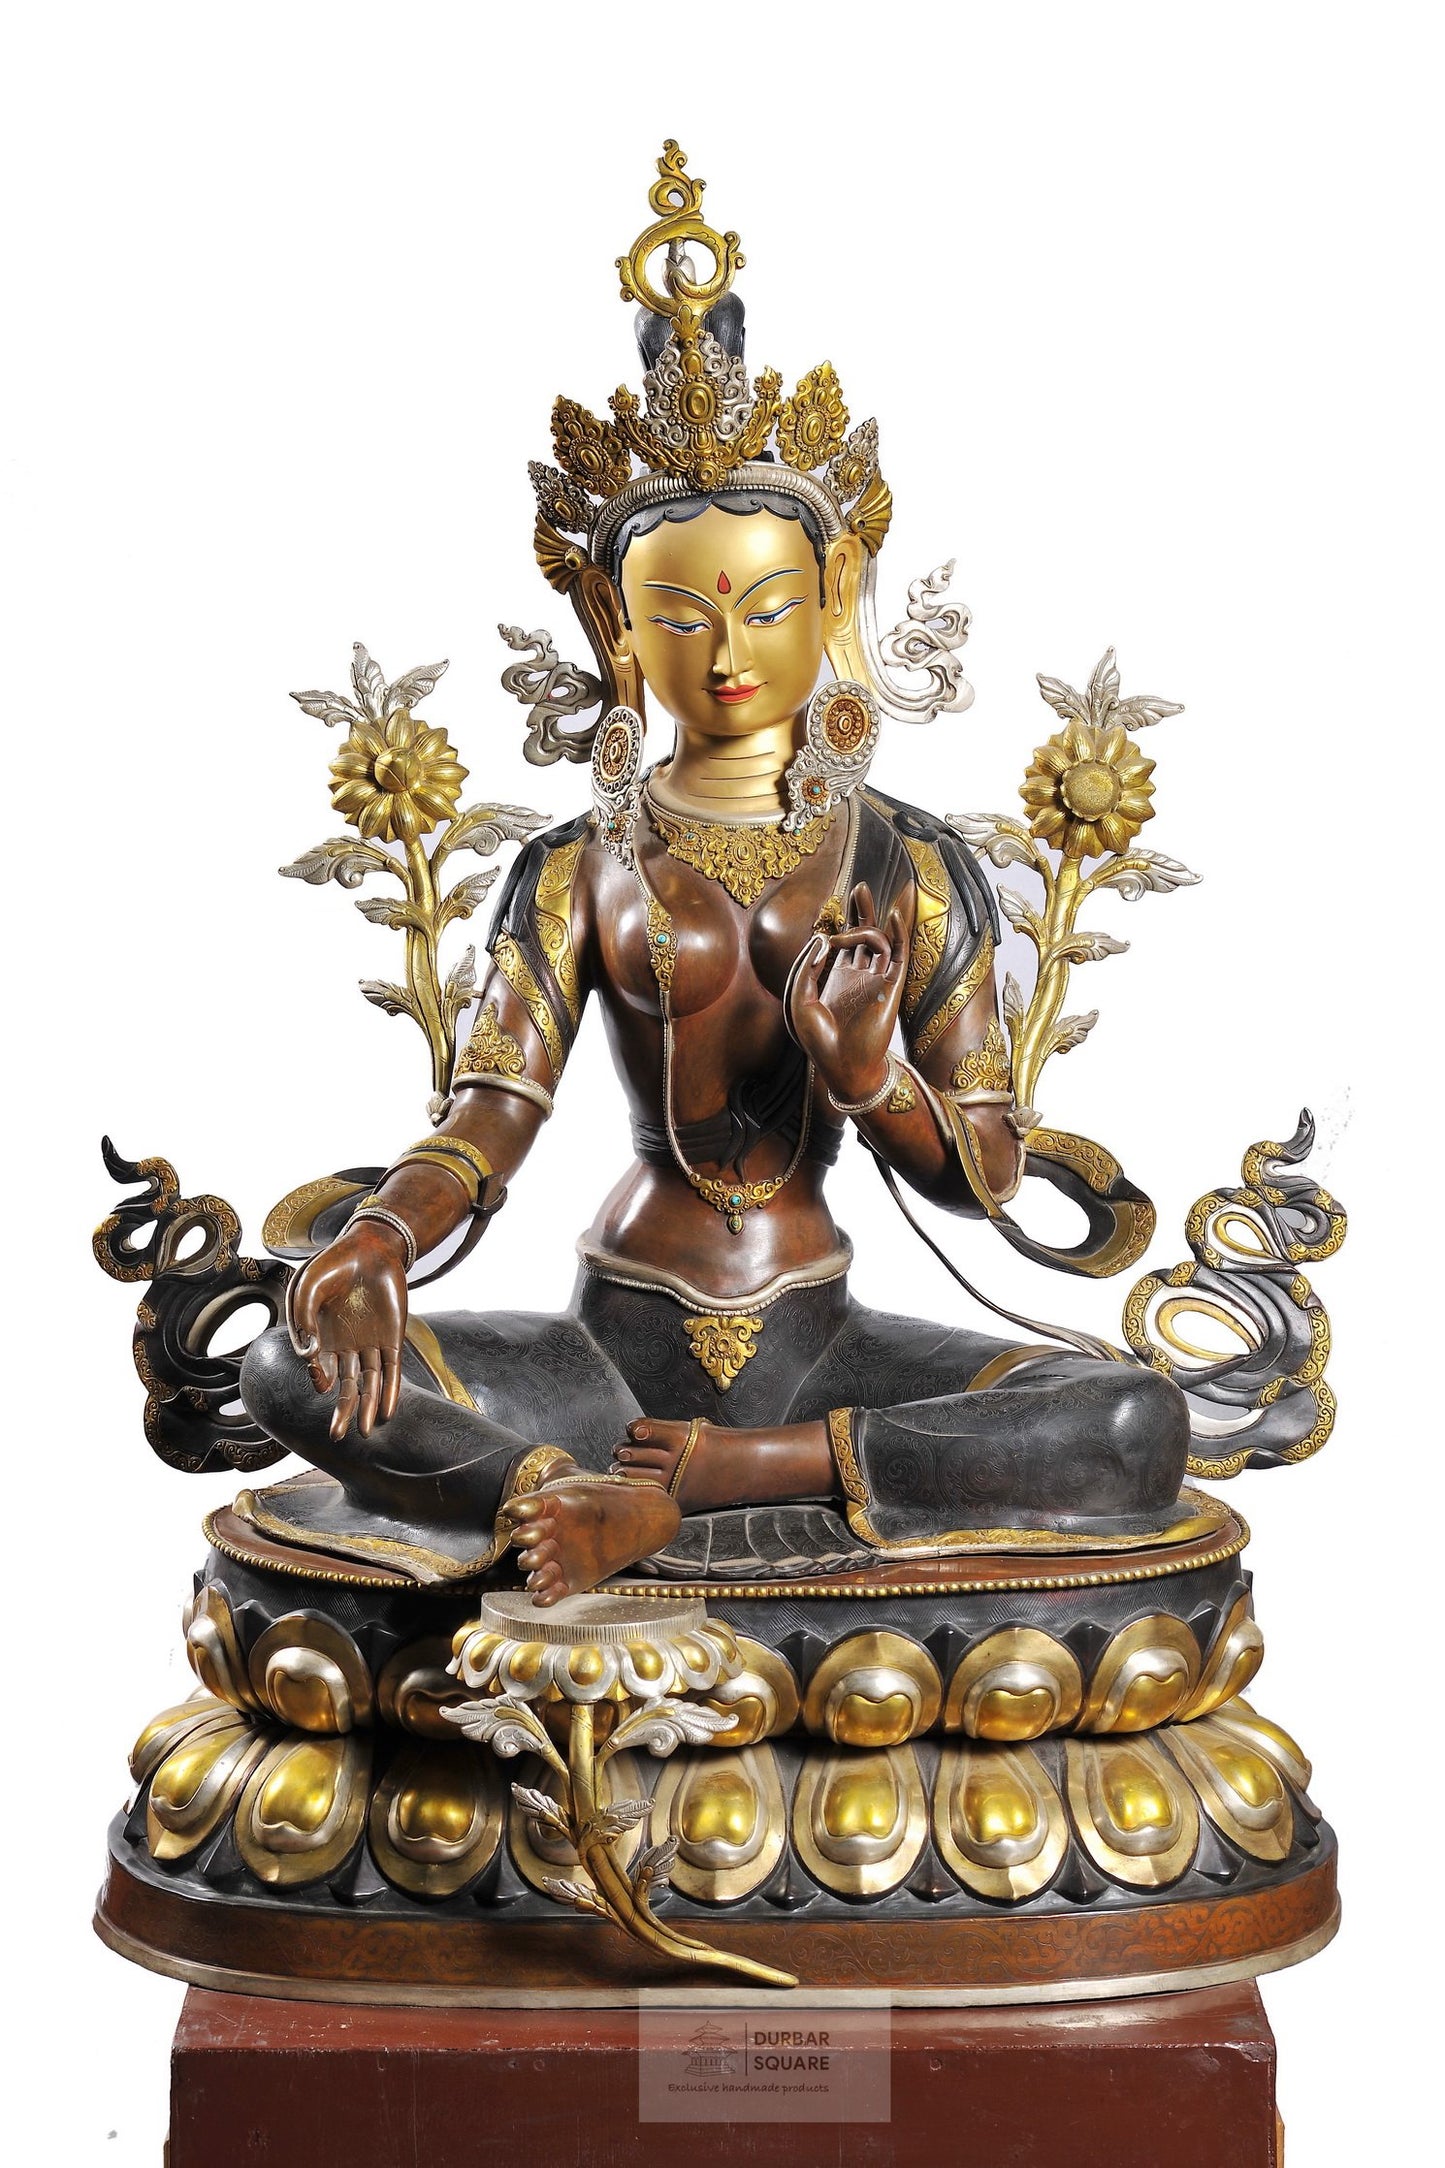 Gold and Silver plated Green Tara Statue